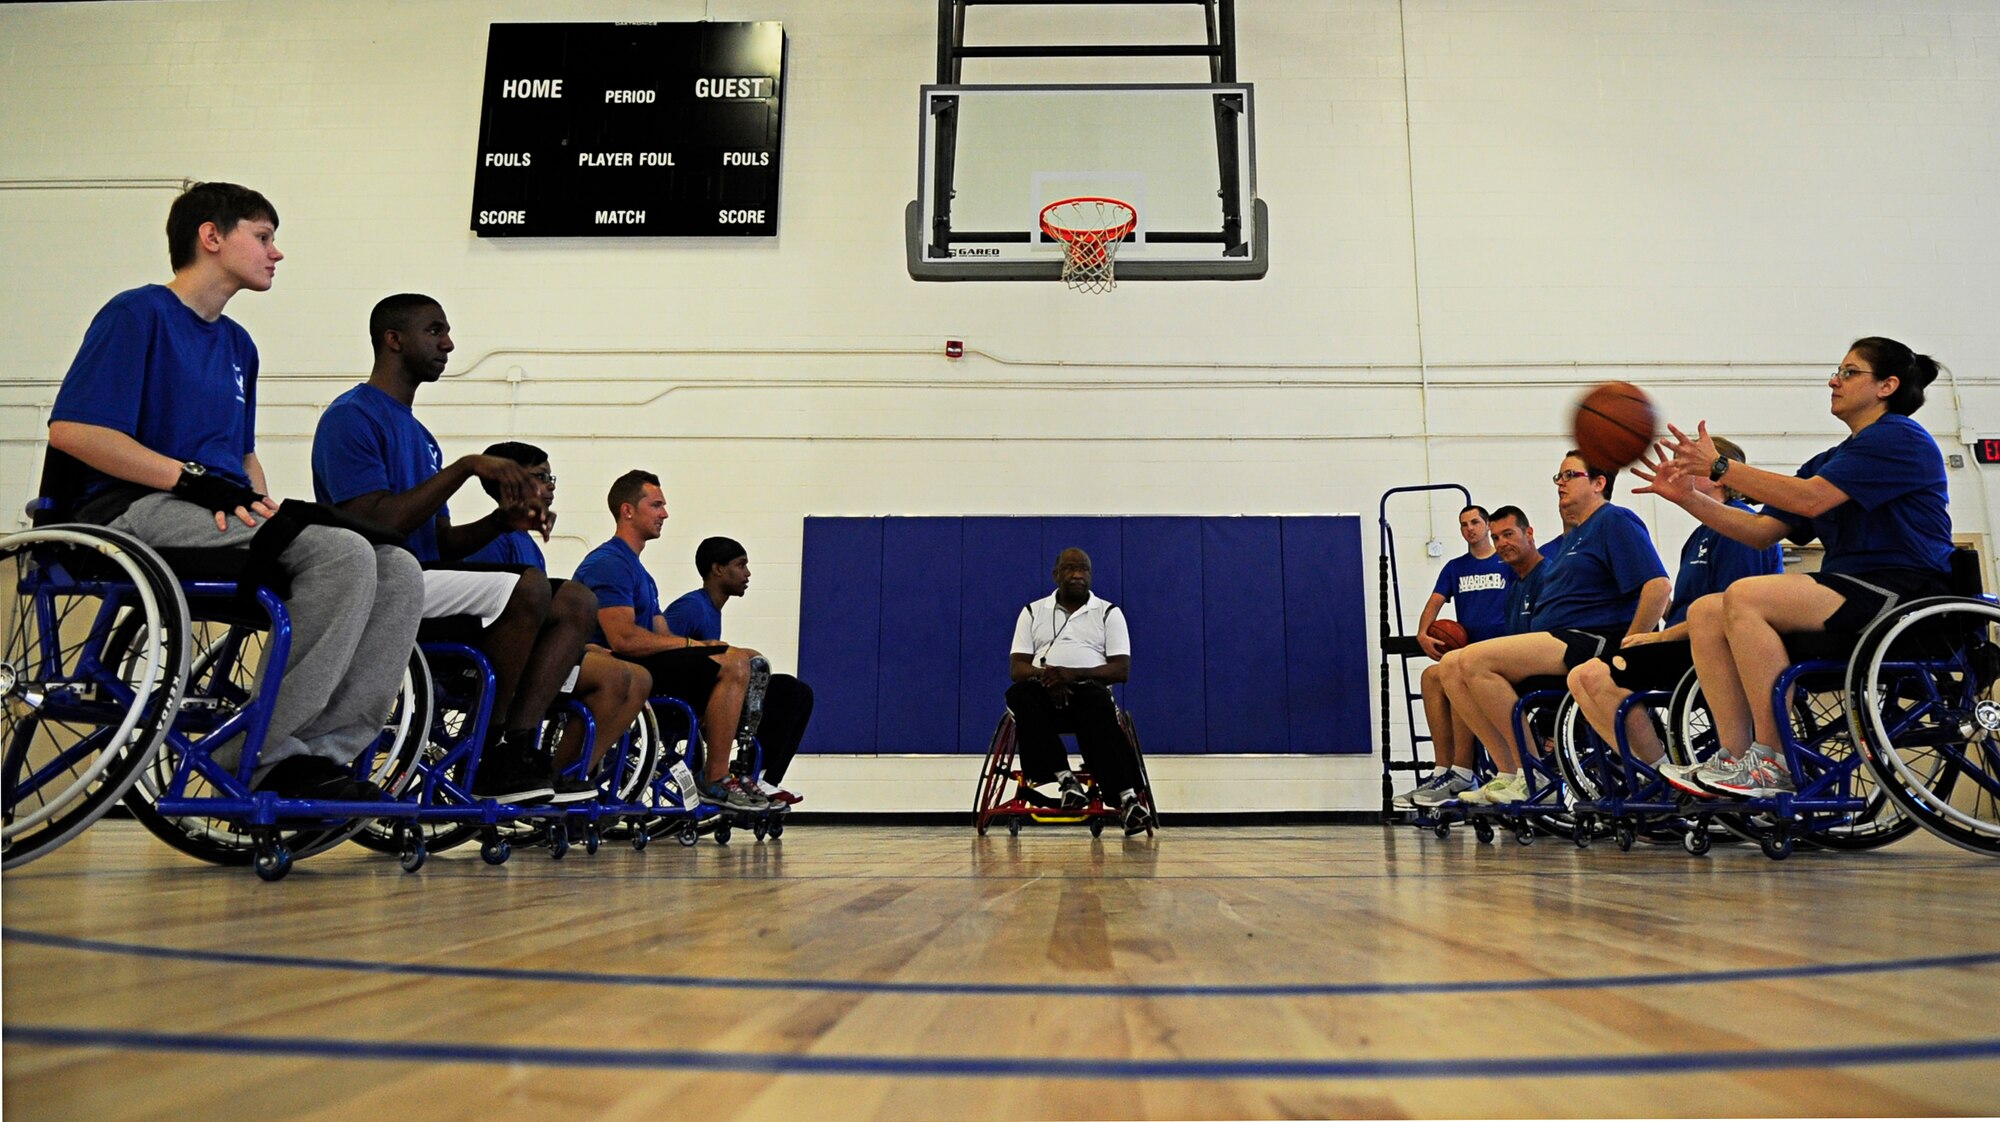 Wounded Warriors learn to play wheelchair basketball during an Air Force Wounded Warrior Adaptive Sports Training Camp at the West Fitness Center at Joint Base Andrews, Md., June 26, 2013. (U.S. Air Force photo/Senior Airman Lauren Main)